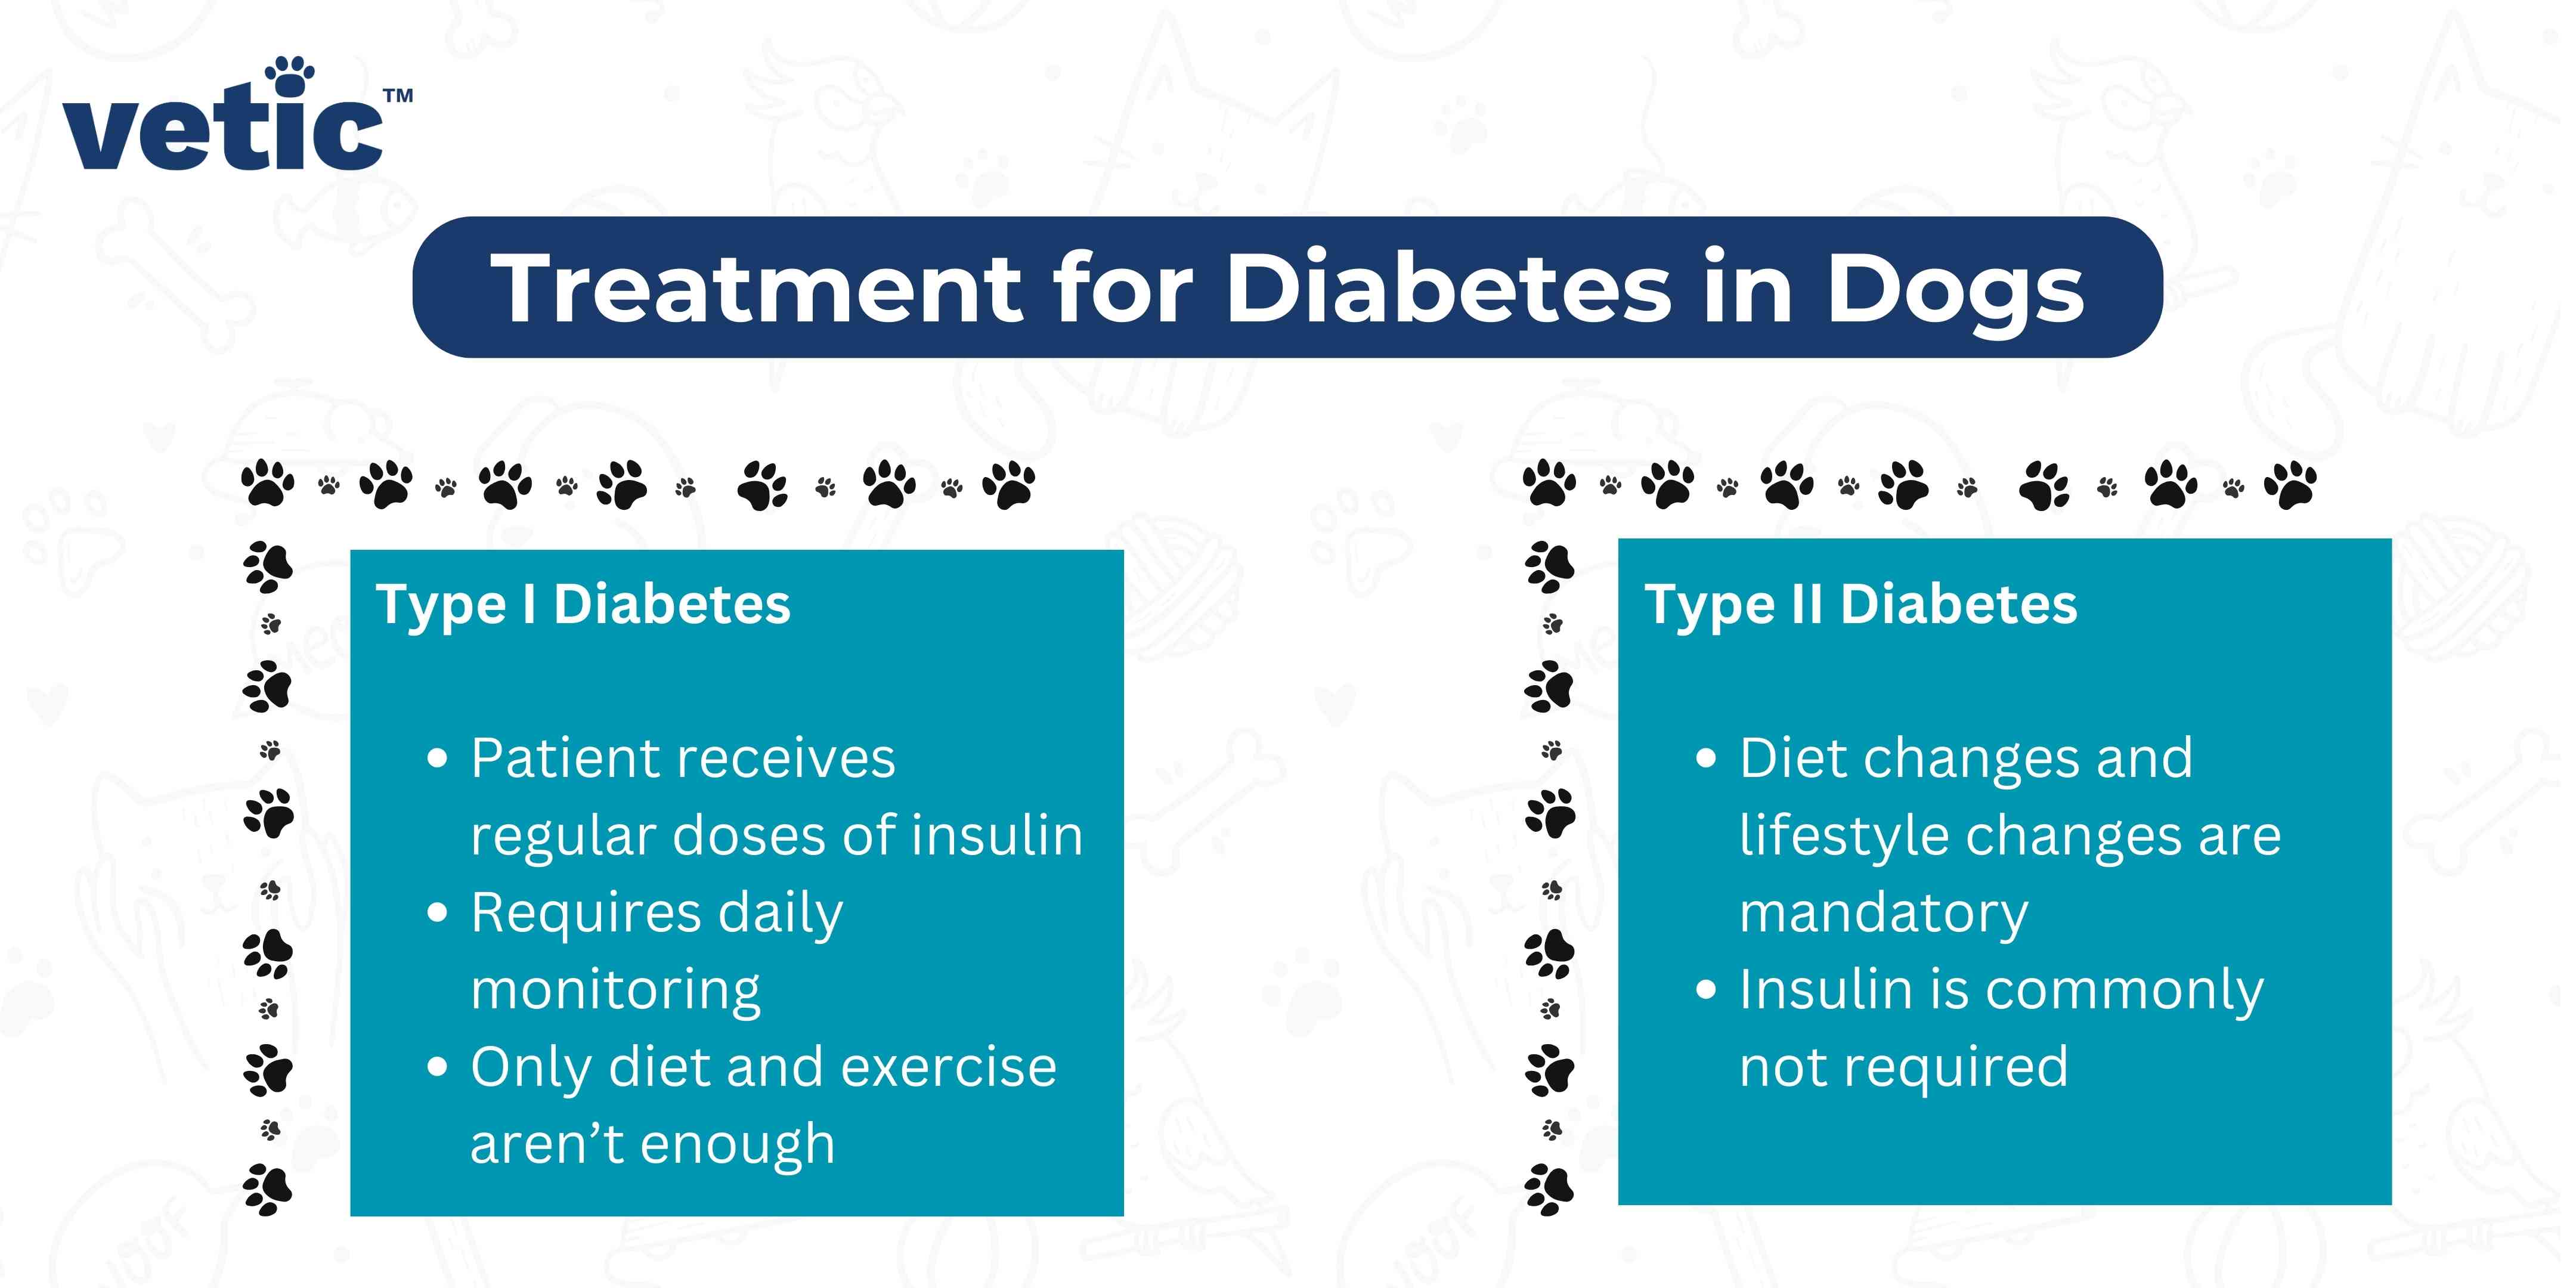 It is an informational graphic by “Vetic™” that outlines the treatment for Type I and Type II diabetes in dogs. It's titled, “Treatment for Diabetes in Dogs”. There are two separate sections, detailing the treatments for Type I and Type II diabetes respectively. For Type I Diabetes, the patient receives regular doses of insulin, requires daily monitoring, and only diet and exercise aren’t enough. For Type II Diabetes, diet changes and lifestyle changes are mandatory, and insulin is commonly not required.